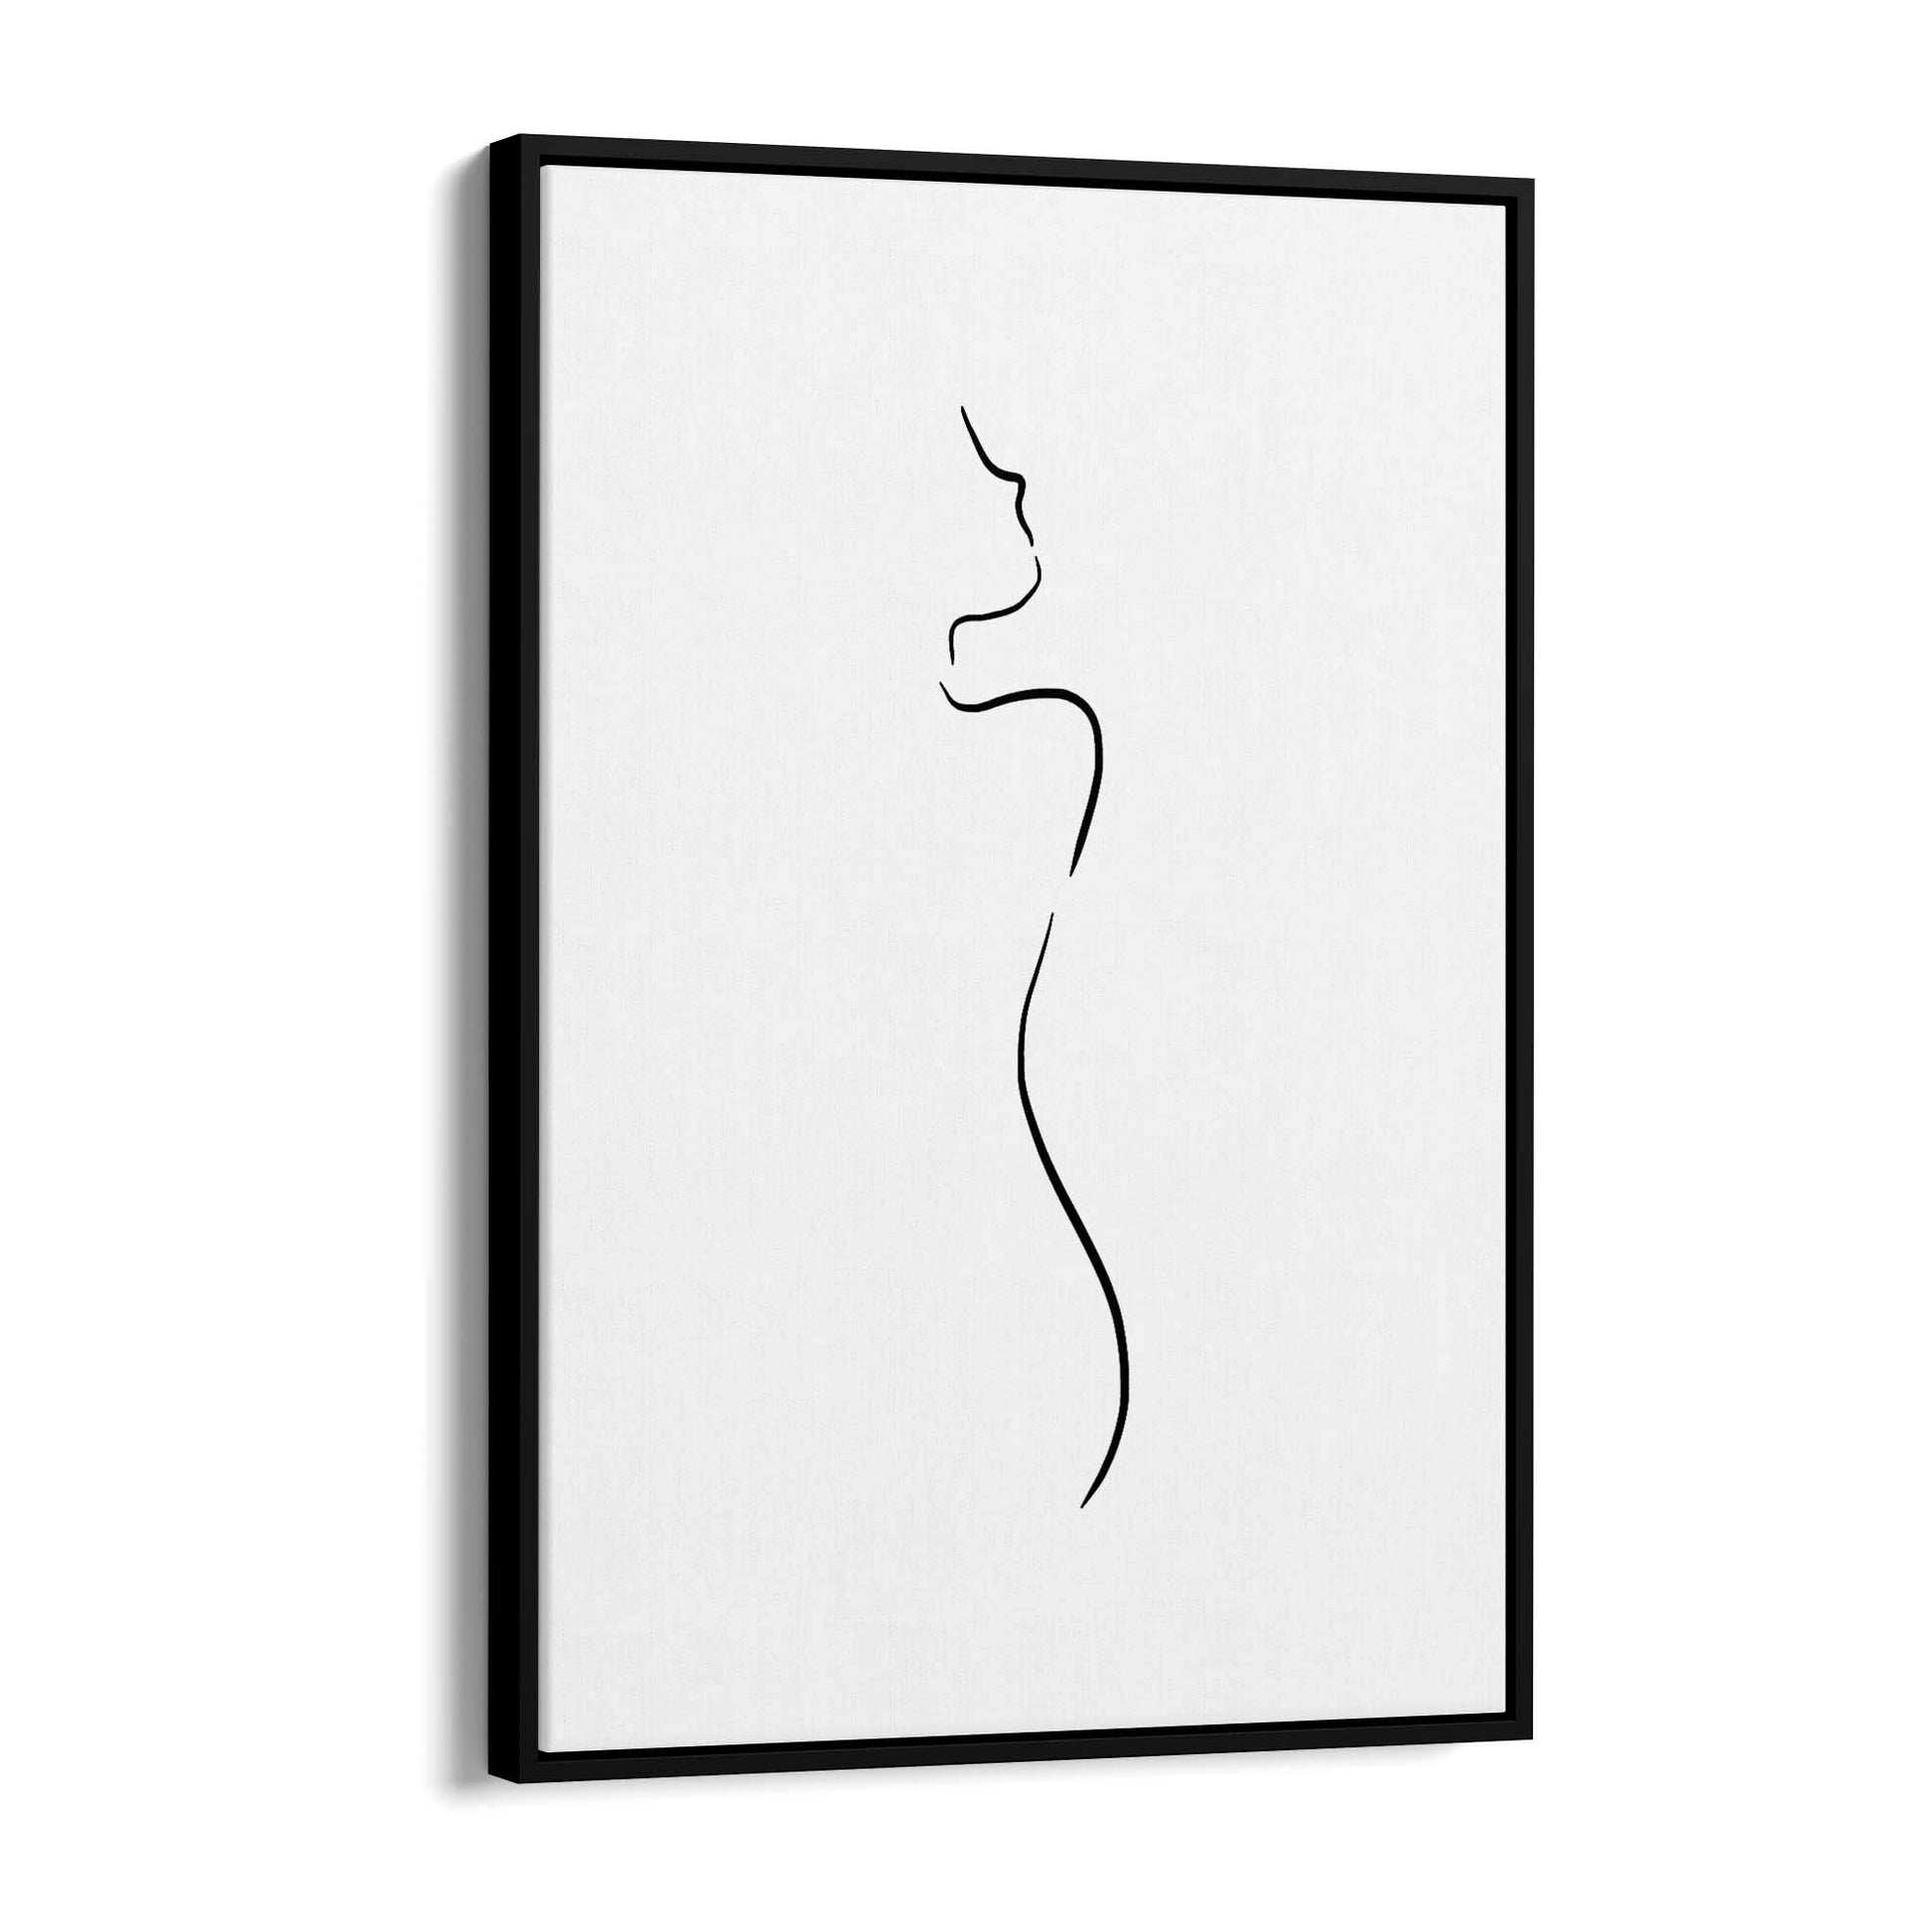 Female Body Nude Minimal Line Drawing Wall Art #1 - The Affordable Art Company